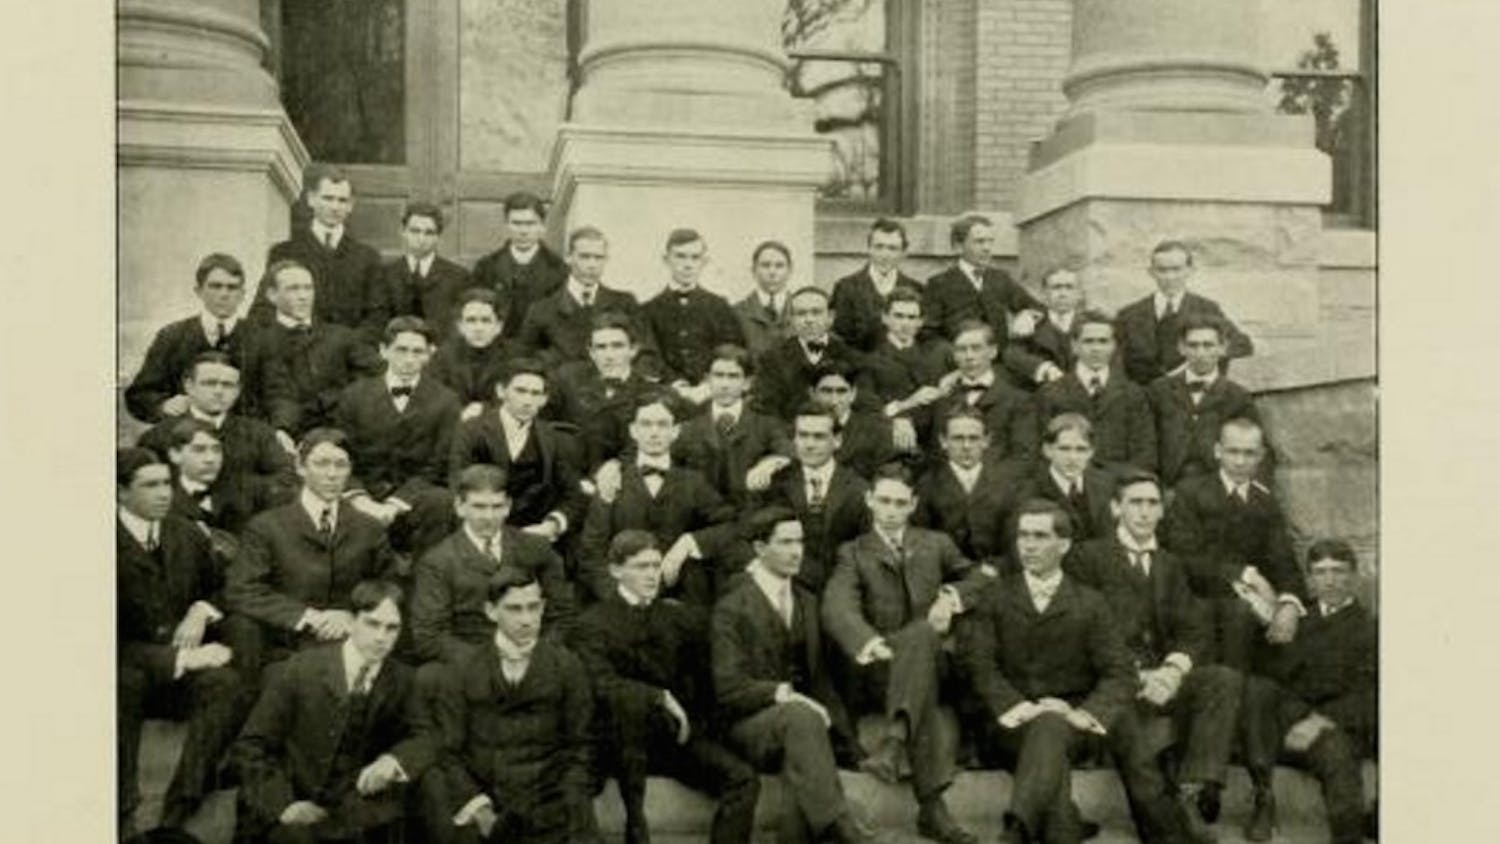 The Yackety Yack included photos to show the class of 1902. Women could enroll starting in 1897, but there are no women shown in this class photo.